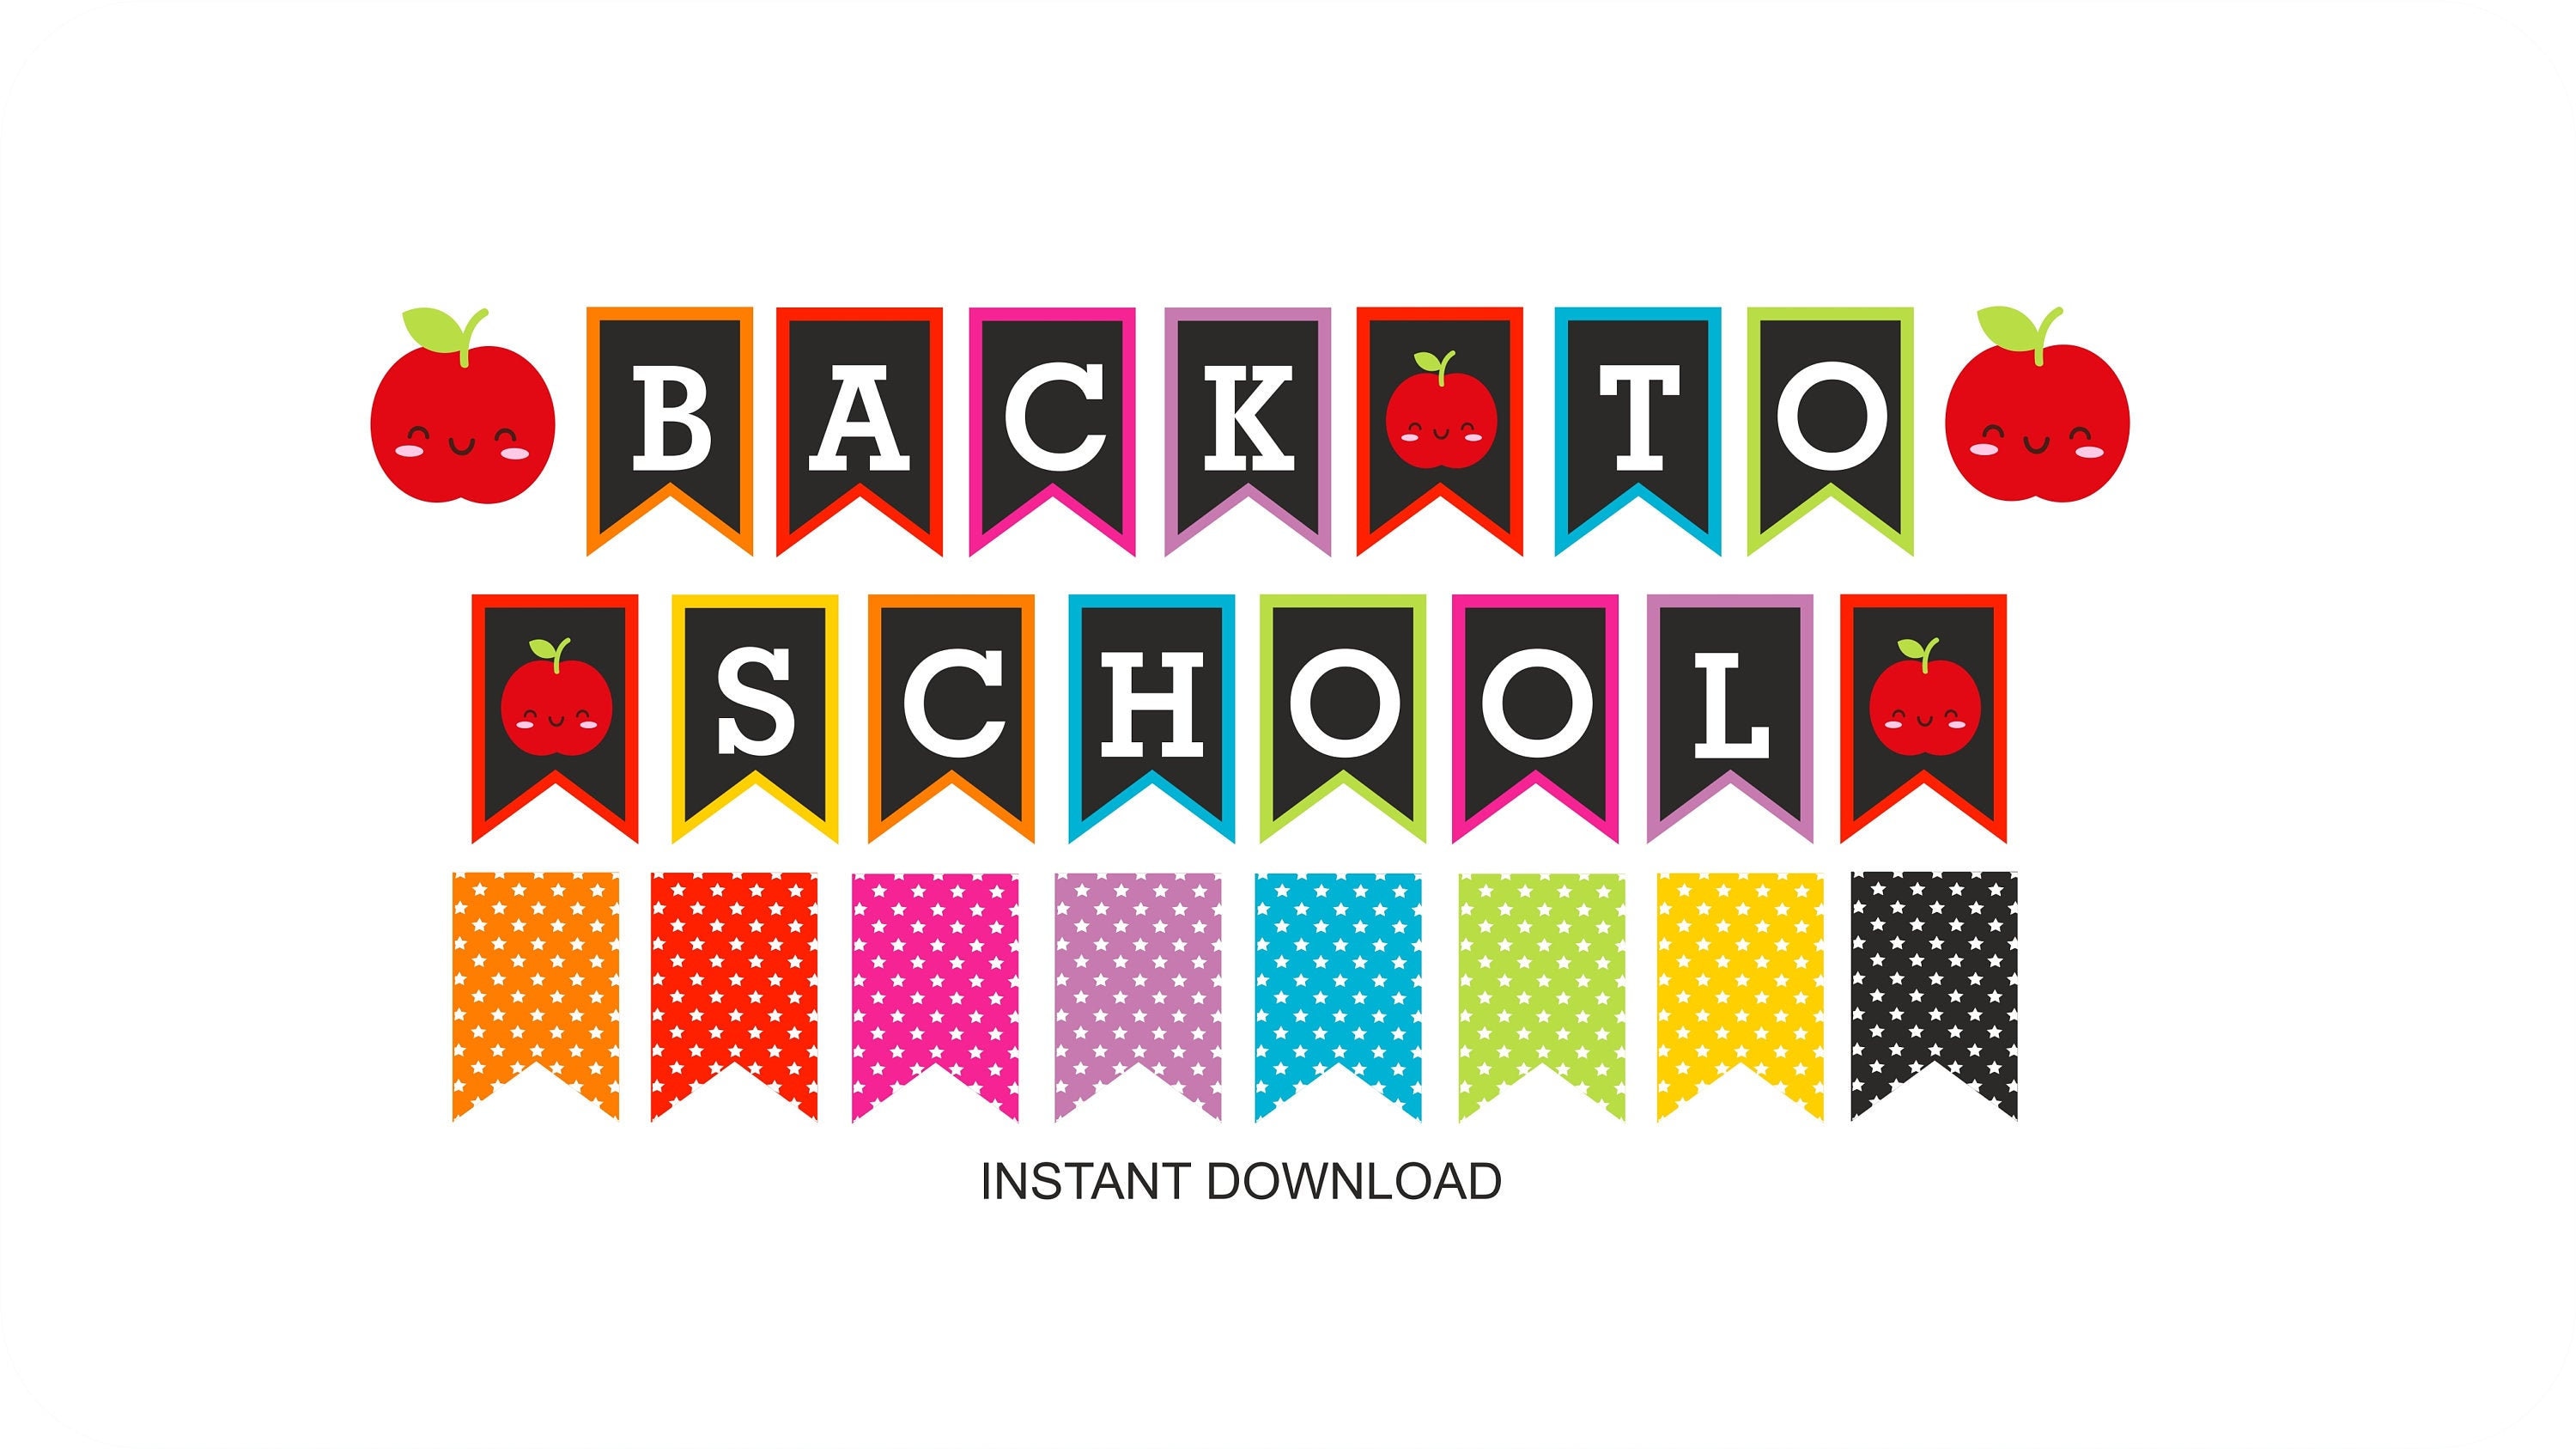 Welcome Back To School Banner Design